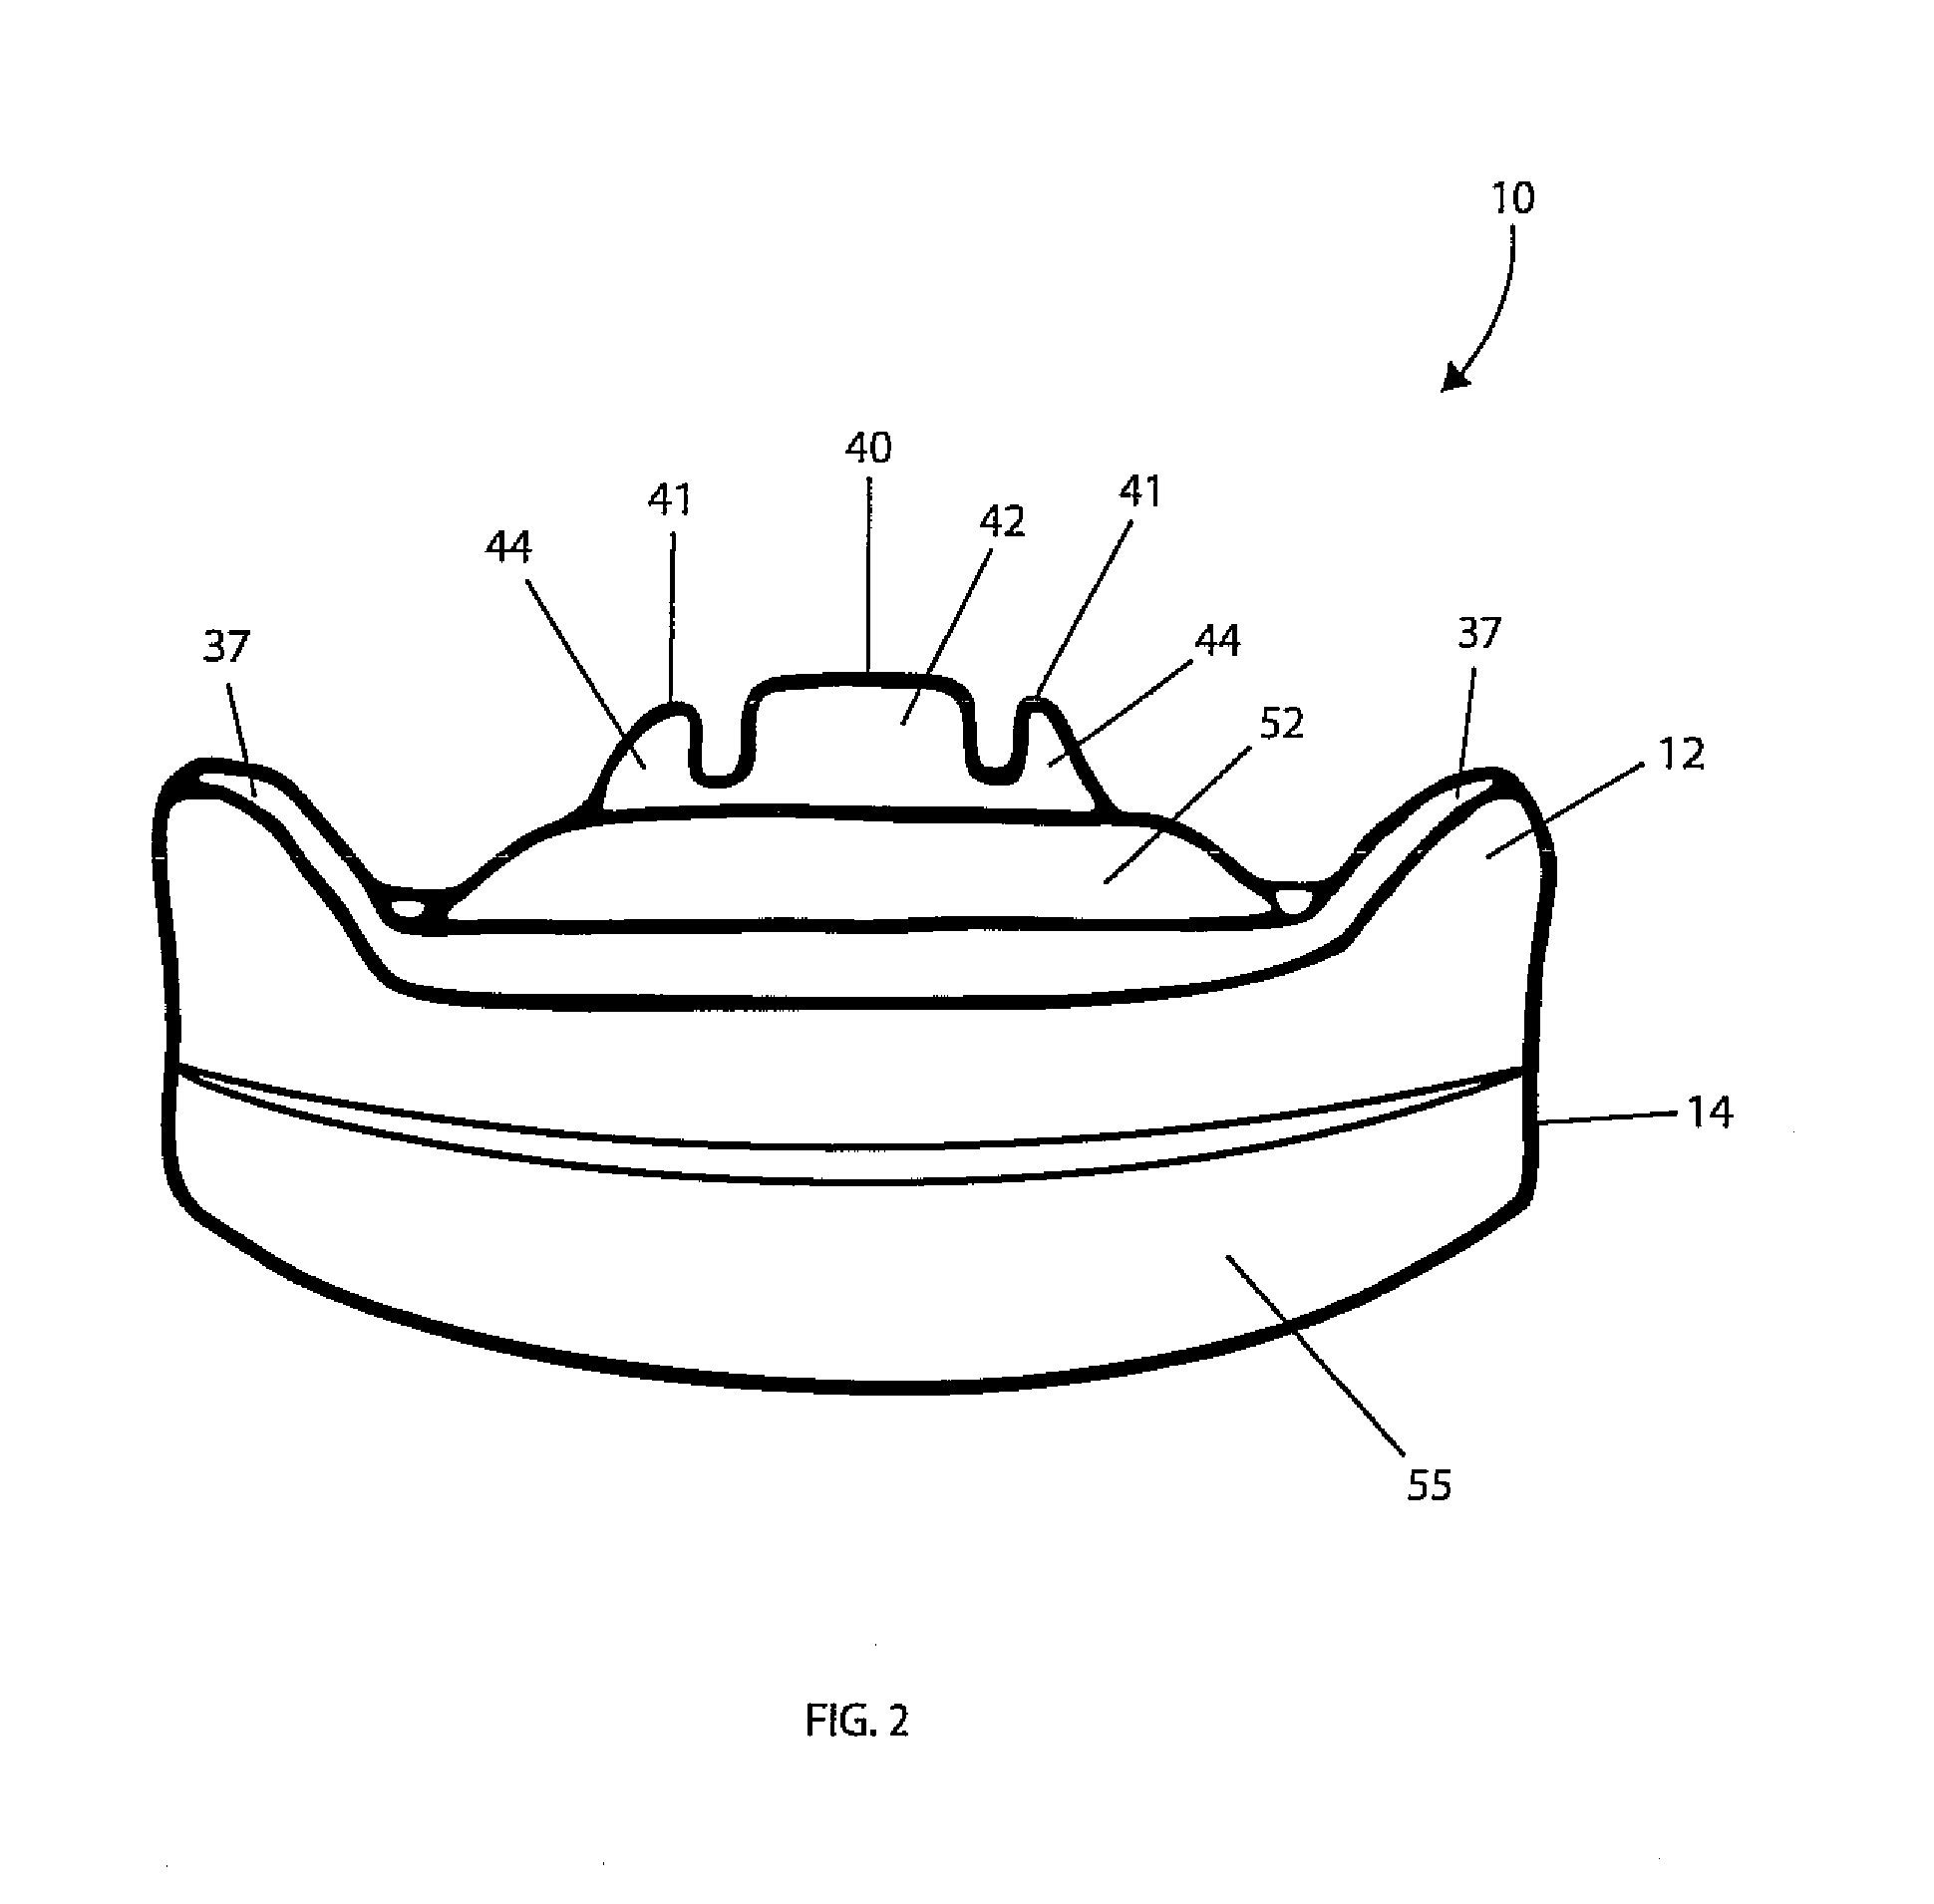 Oral appliance, system and method for correcting class iii problems of mandibular prognathism